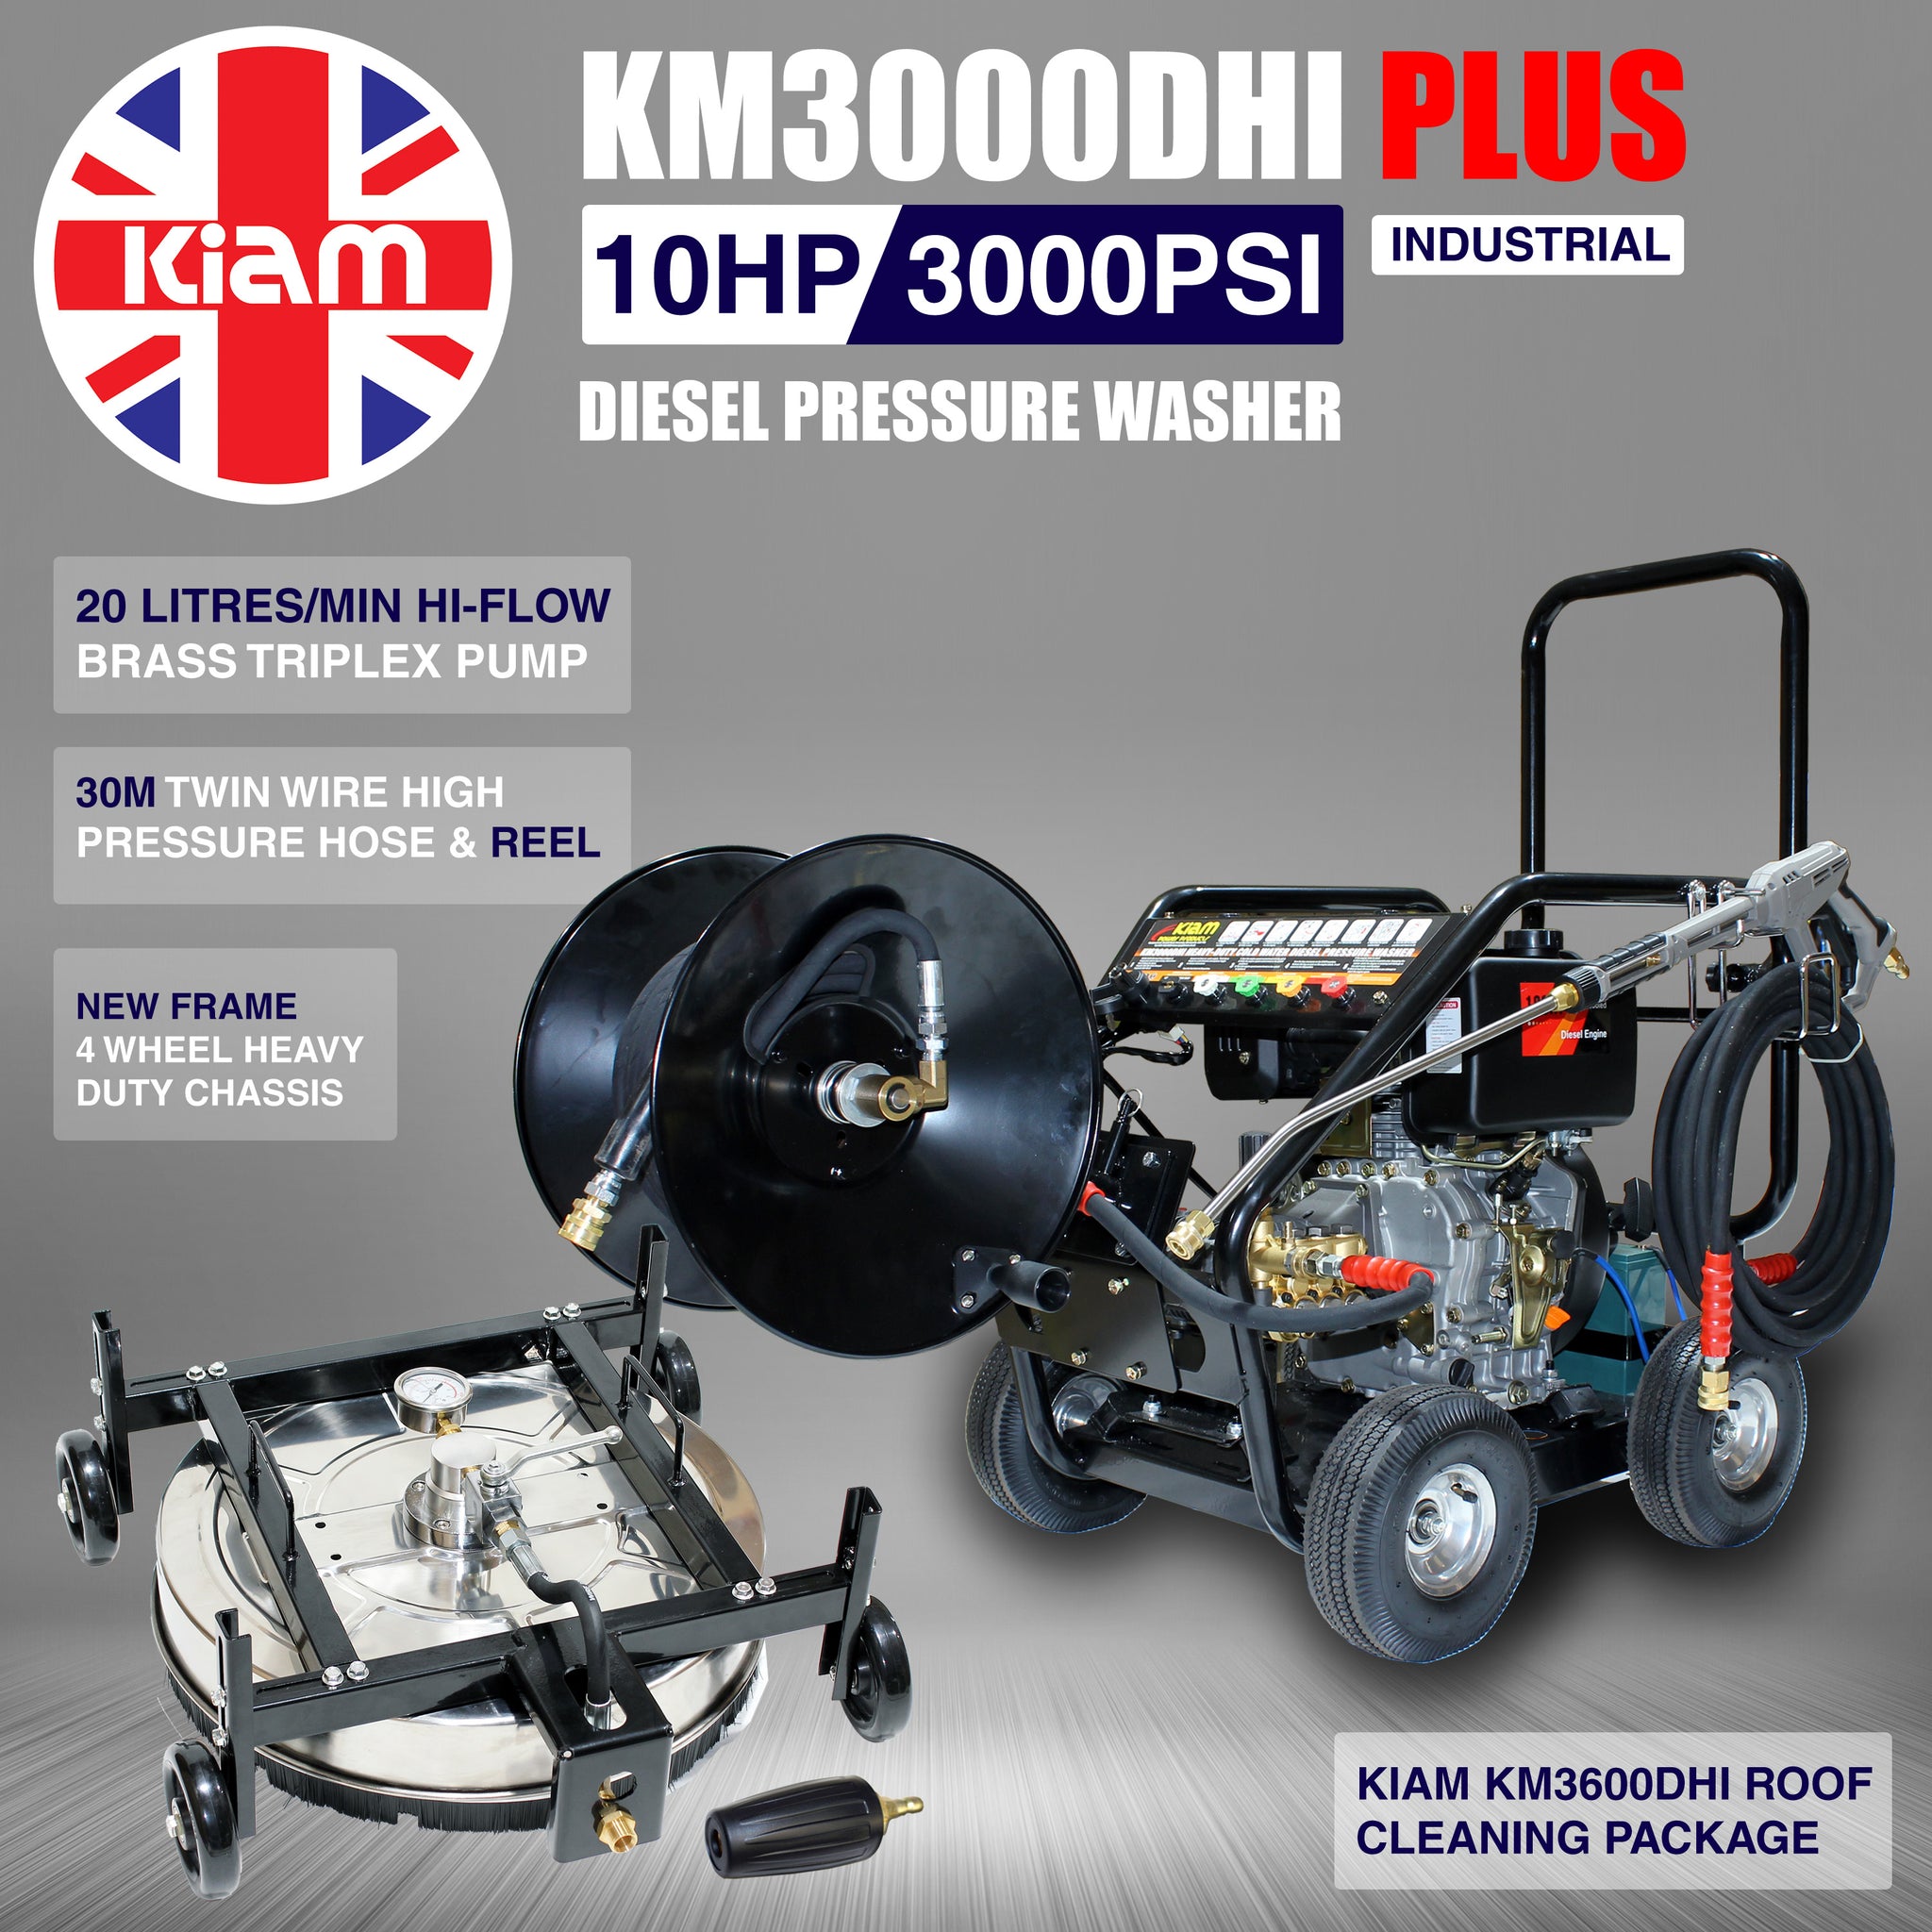 Roof Cleaning Equipment - KM3000DHI PLUS Diesel Pressure Washer, 30m H